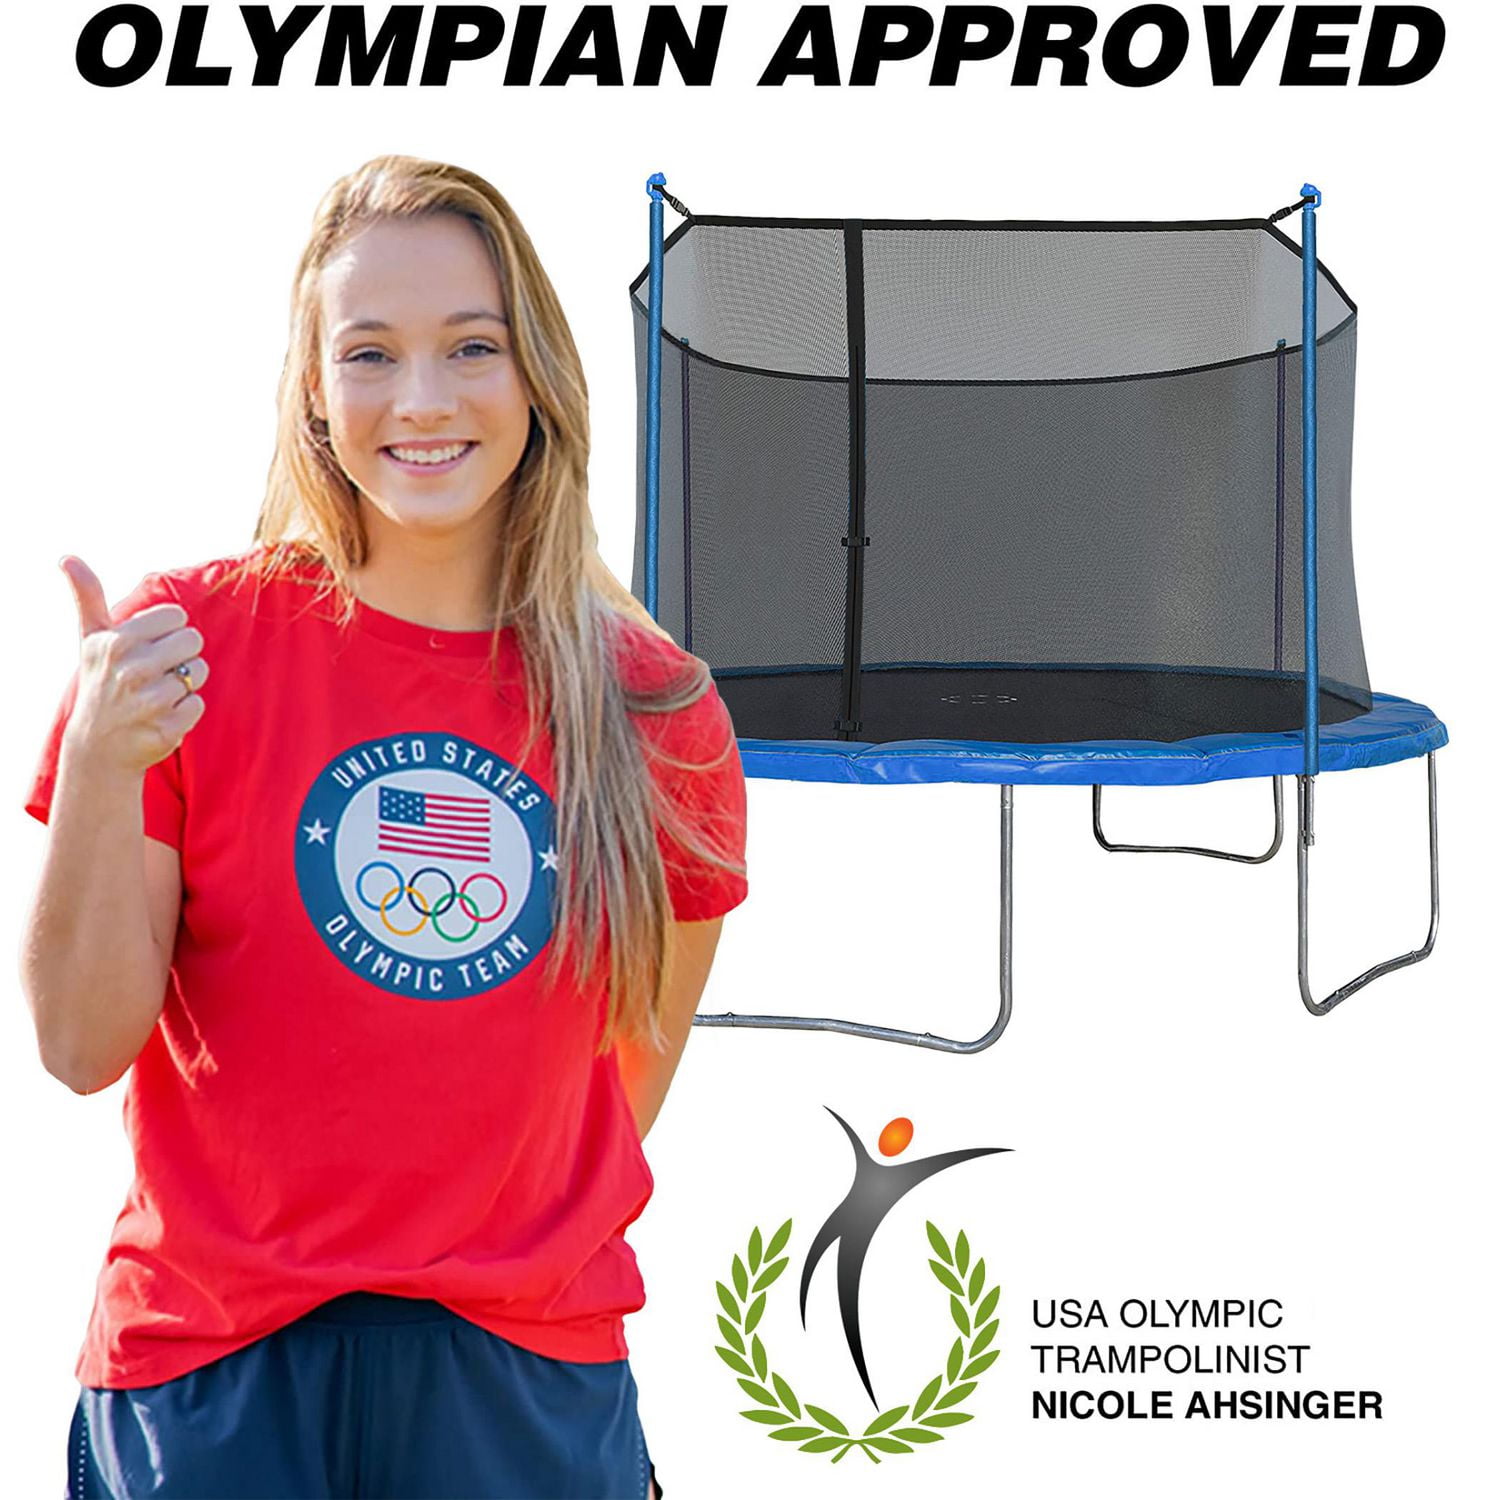 Walmart La Crosse - 14 ft trampolines in stock! Only $198! They are going  quickly so stop by your La Crosse Walmart and get one before they're gone!